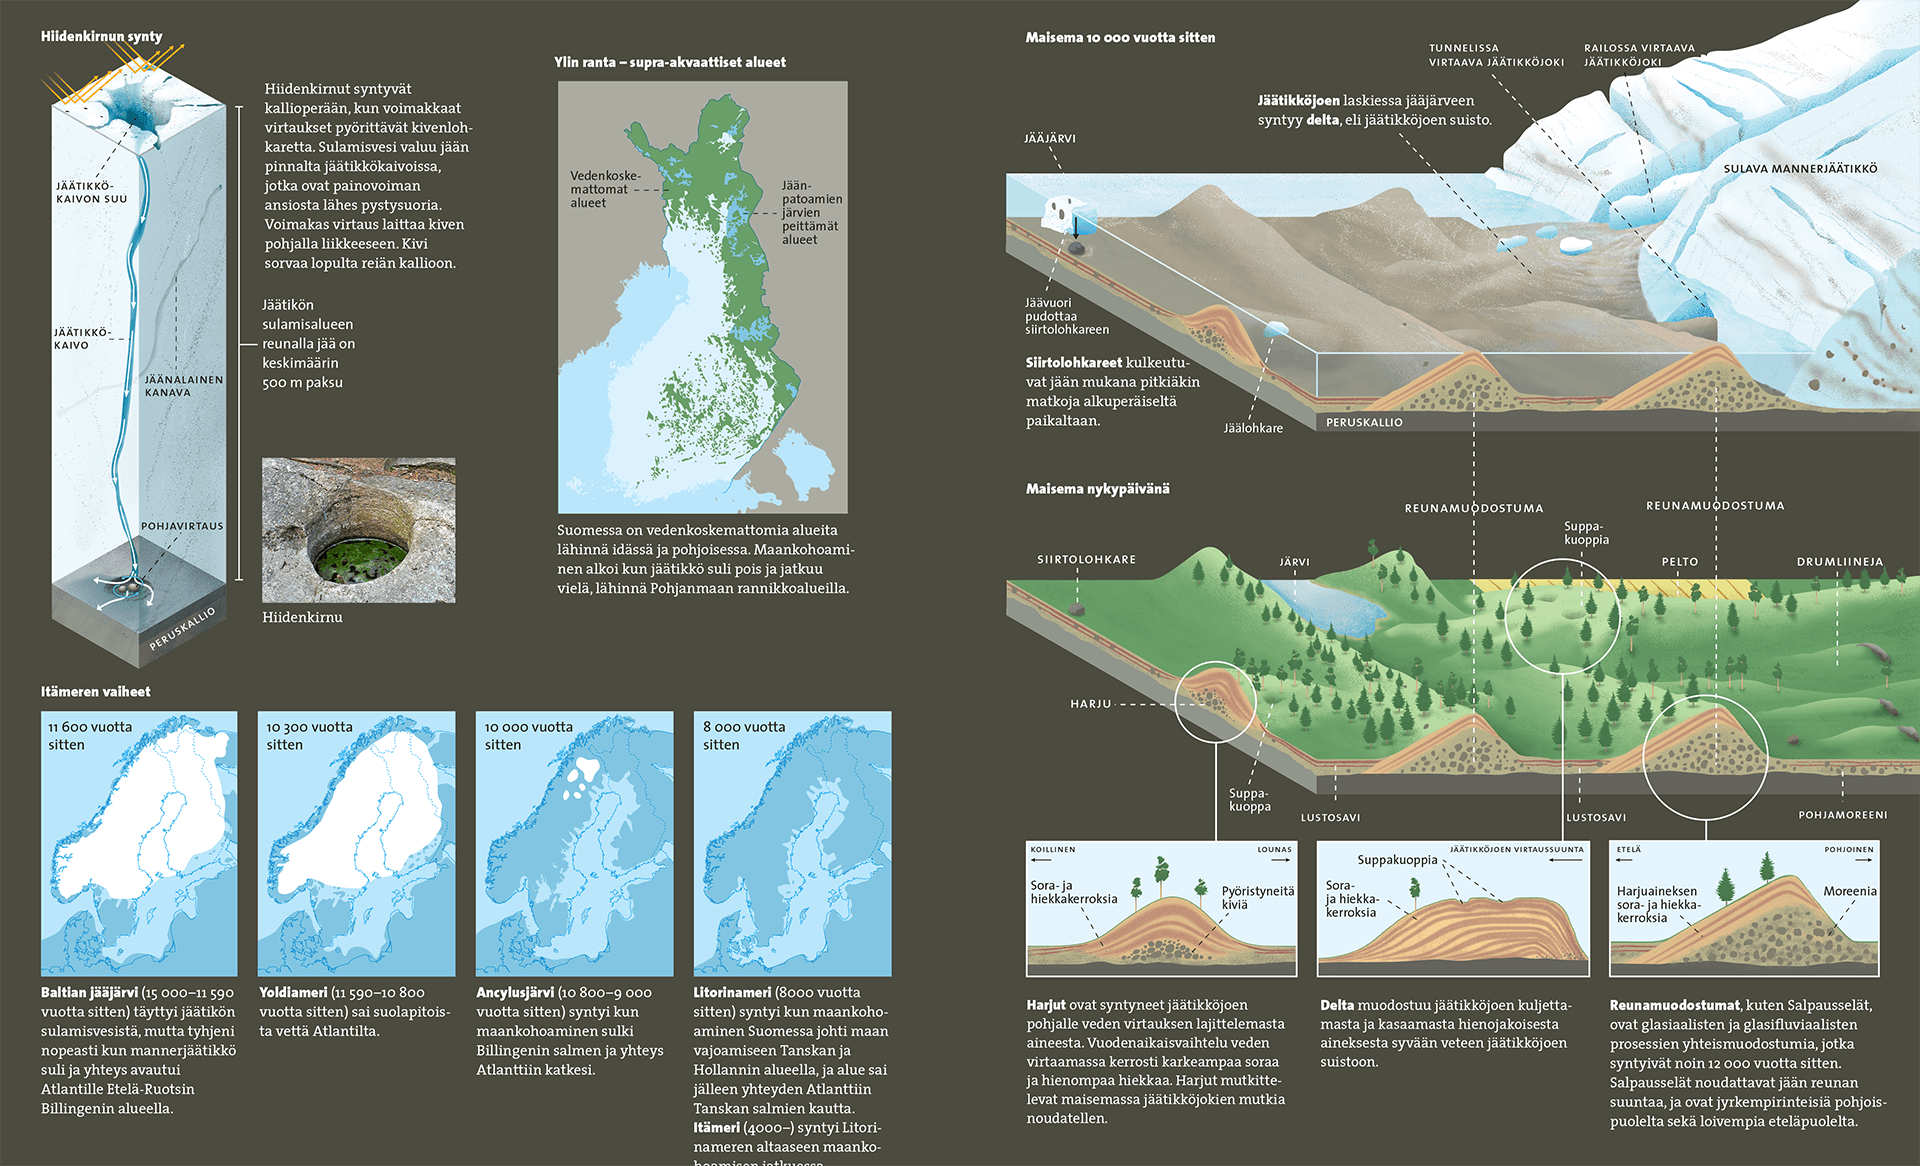 Spread with infographics demonstrating terrain changes during the ice age.